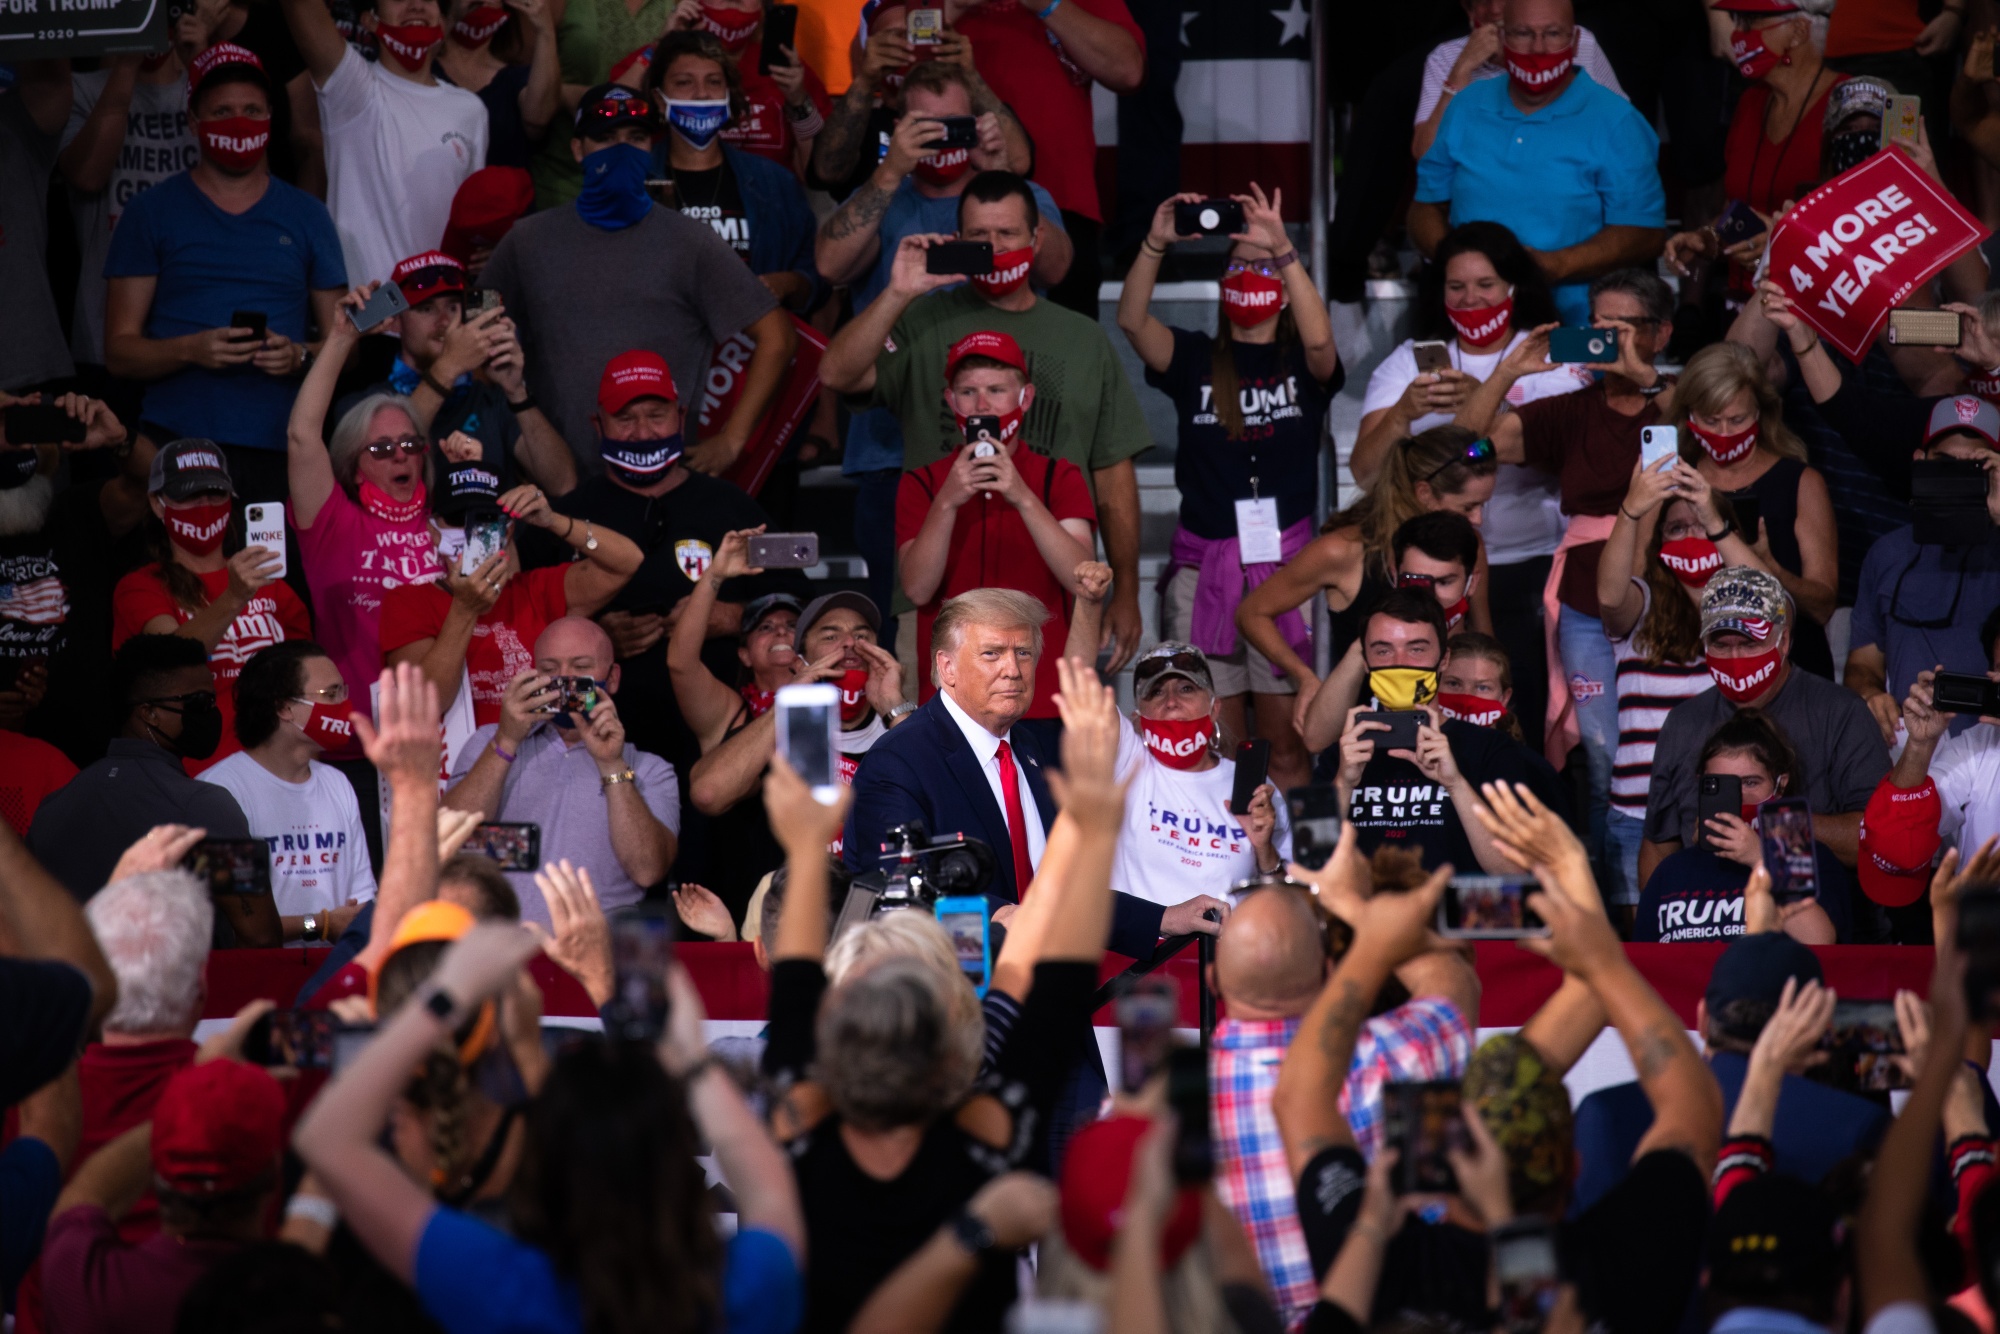 Donald Trump arrives to speak at a campaign rally in Winston-Salem, North Carolina, on Sept. 8.